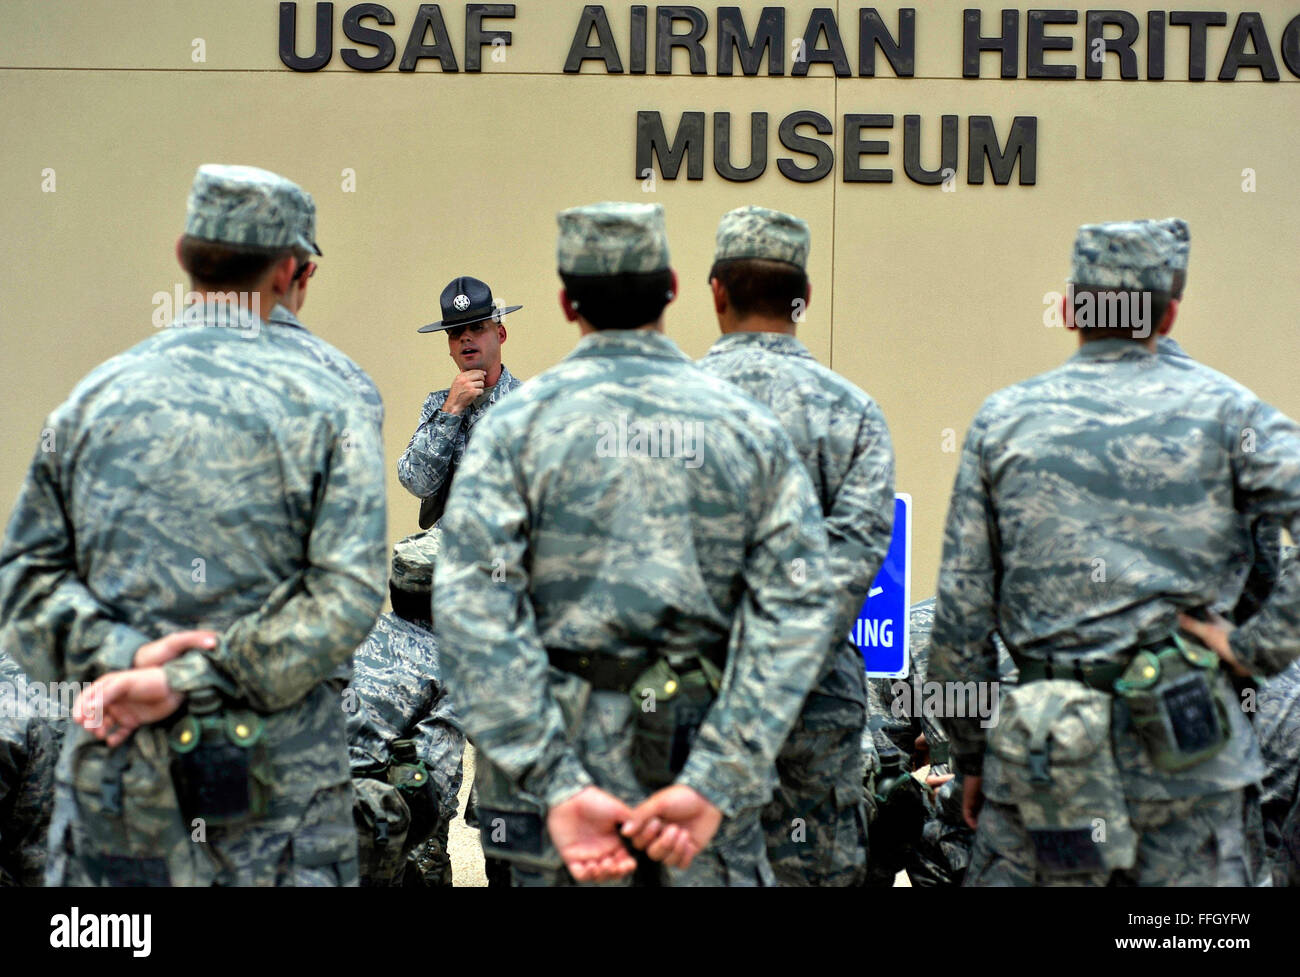 An Air Force basic military training instructor briefs trainees about the importance of their visit to the USAF Airman Heritage Museum before releasing them to view the exhibits. Stock Photo